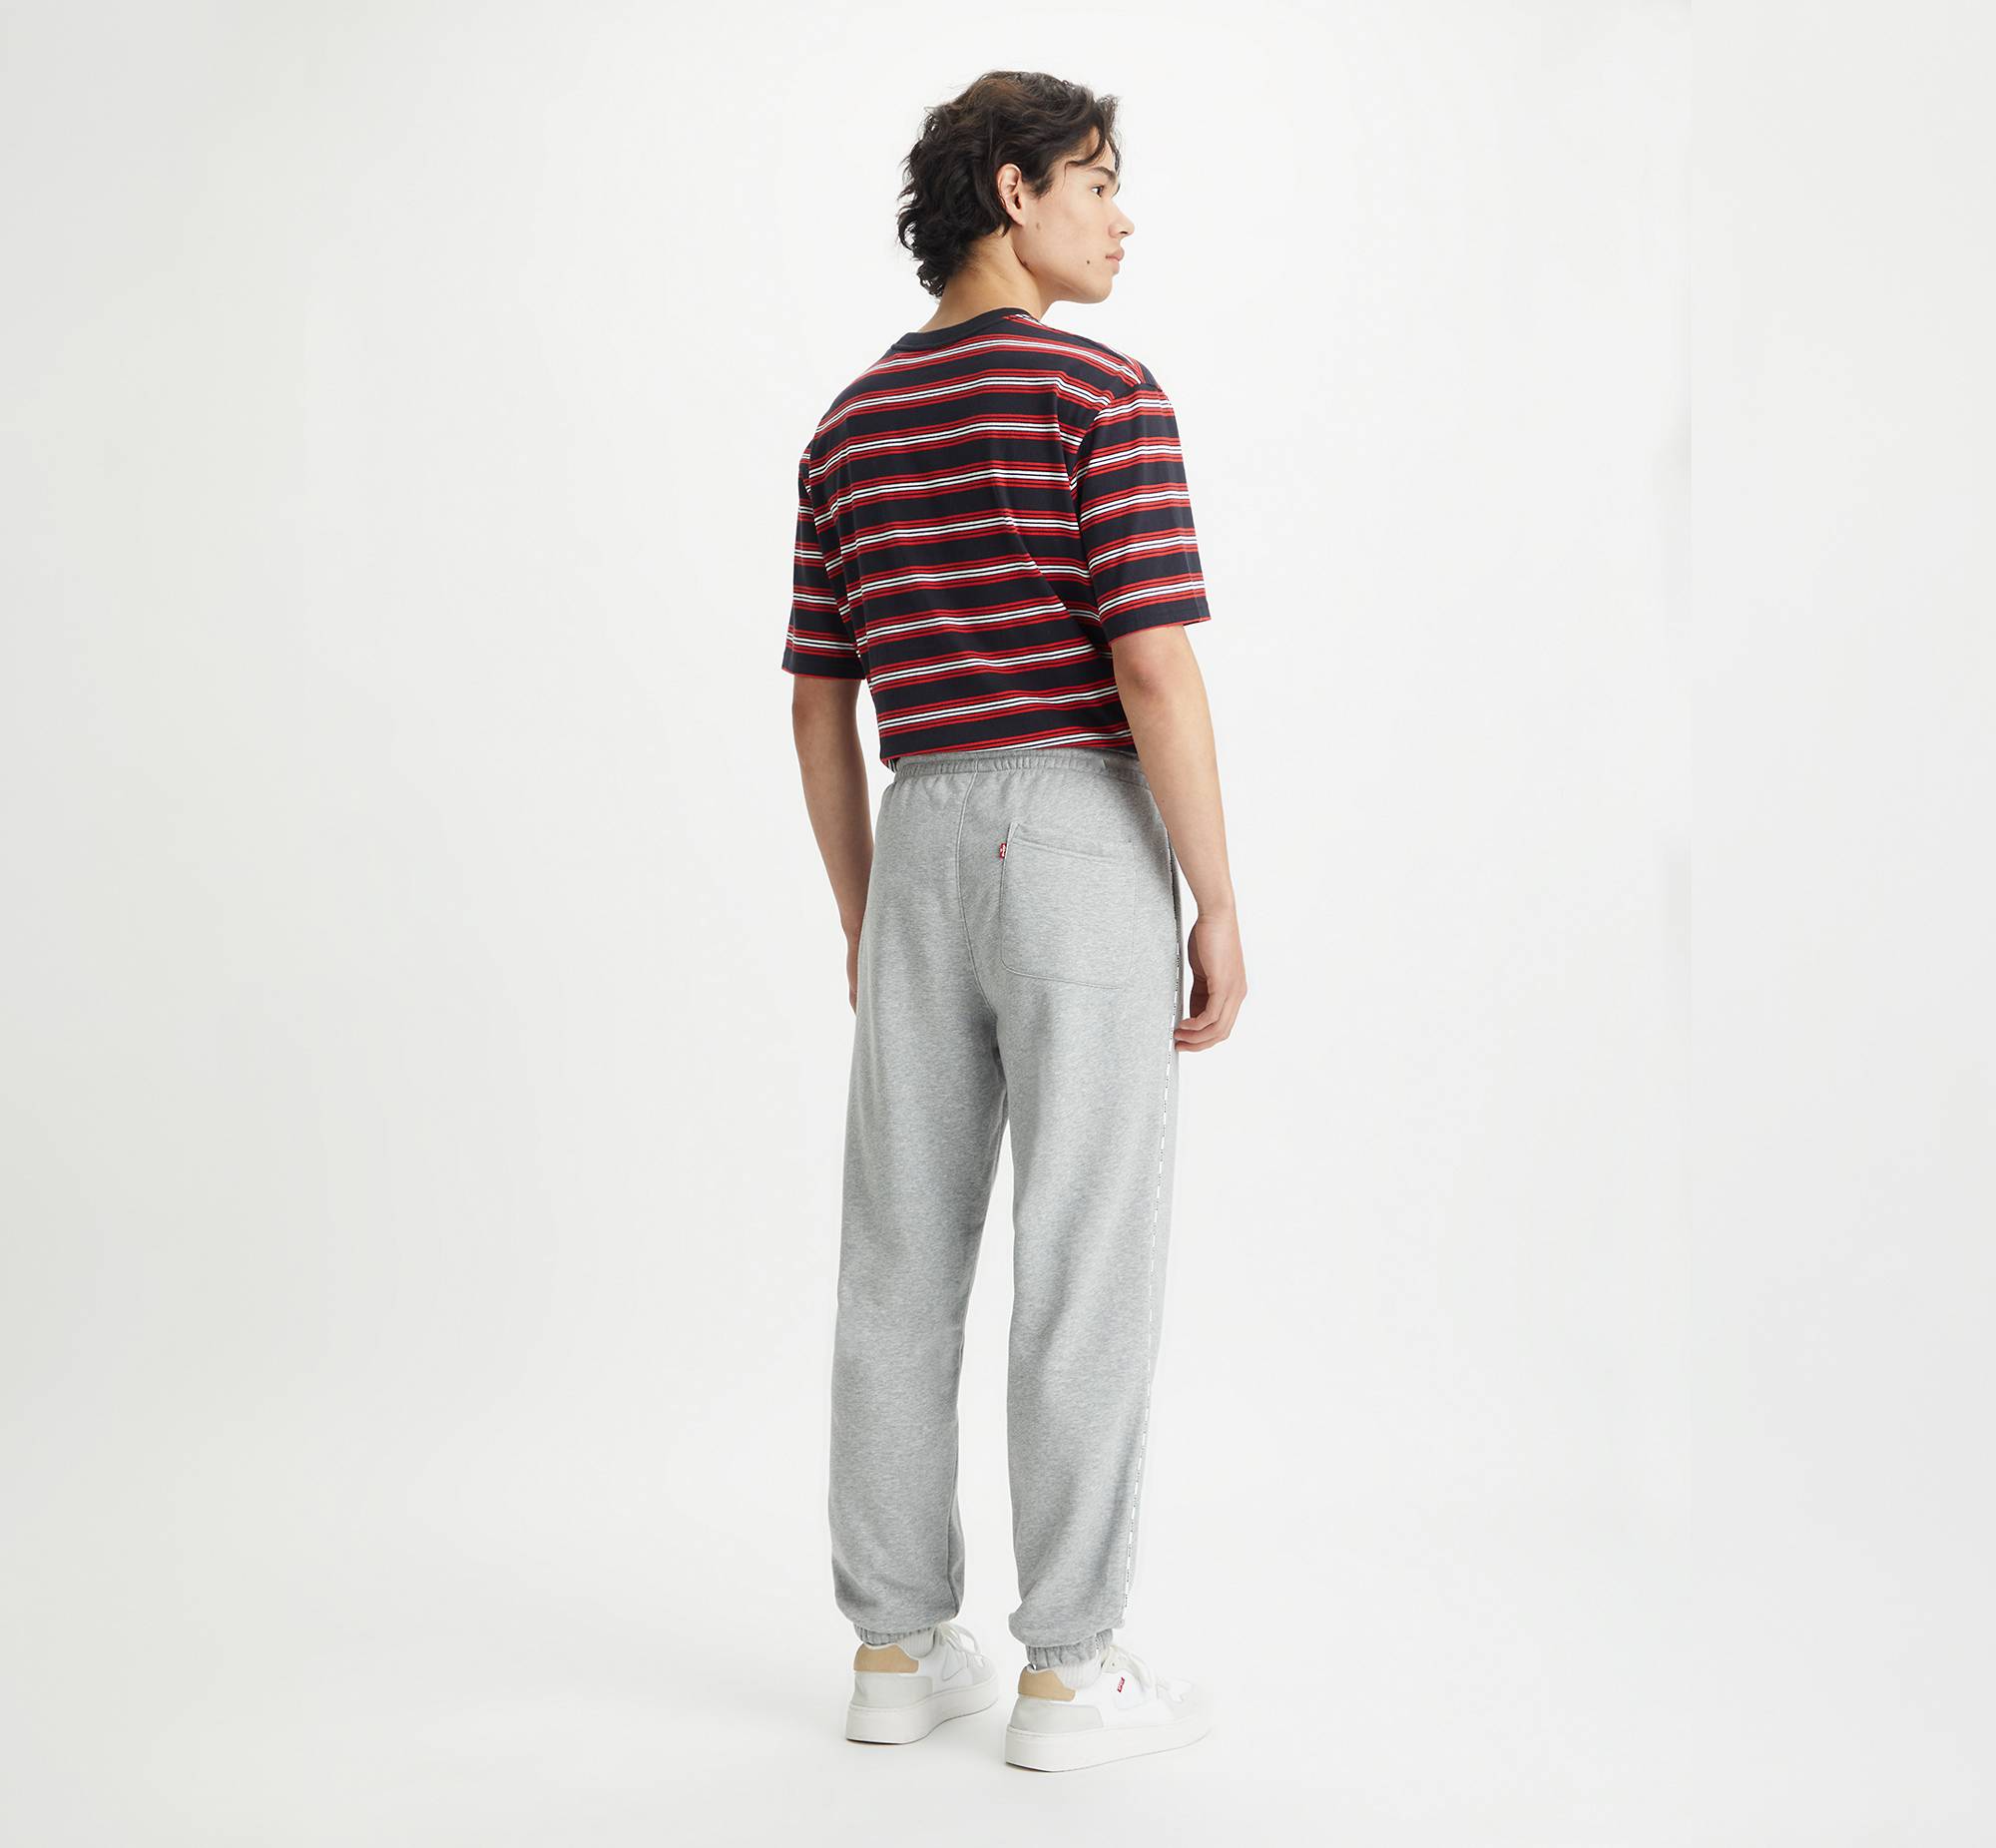 Graphic Piping Sweatpant 3